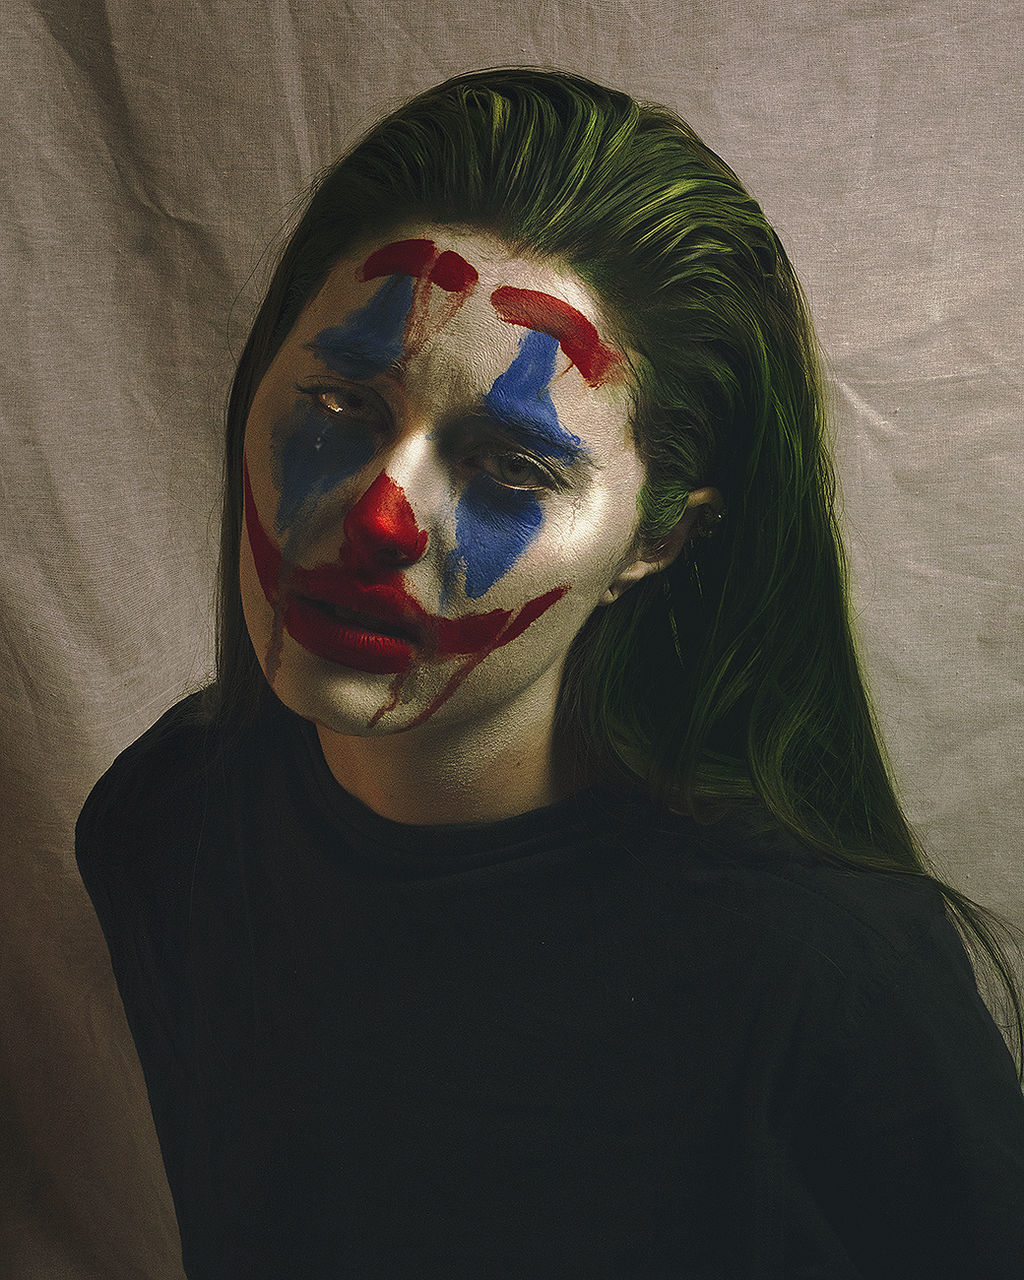 one person, paint, portrait, face paint, front view, indoors, headshot, lifestyles, young adult, make-up, real people, leisure activity, young women, women, adult, creativity, body part, hairstyle, human face